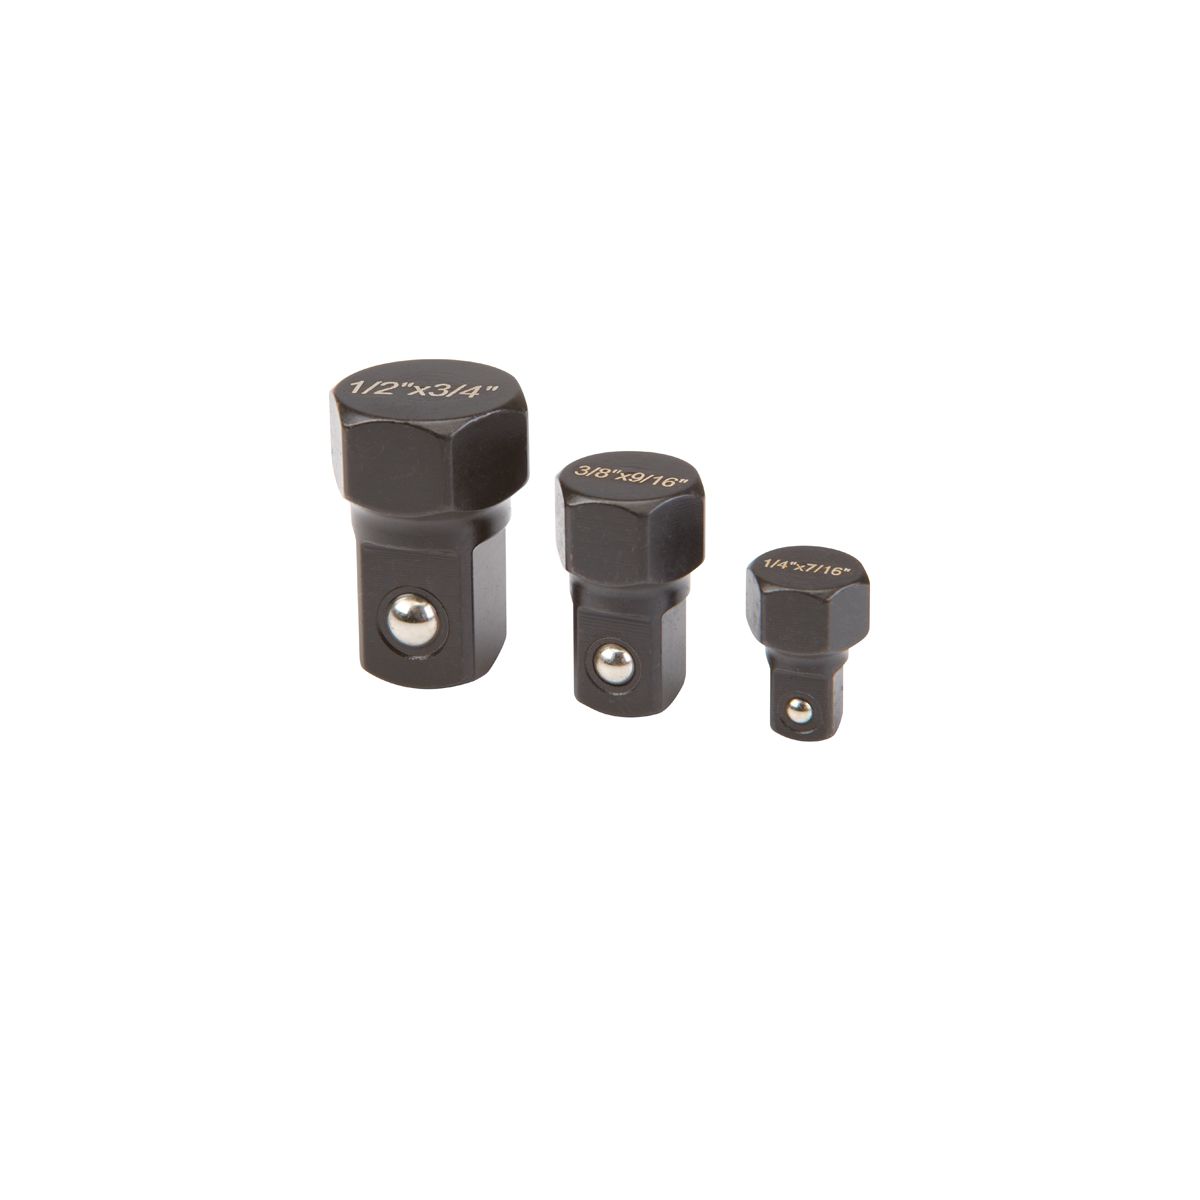 PITTSBURGH 3 Piece Square Drive Socket Caps